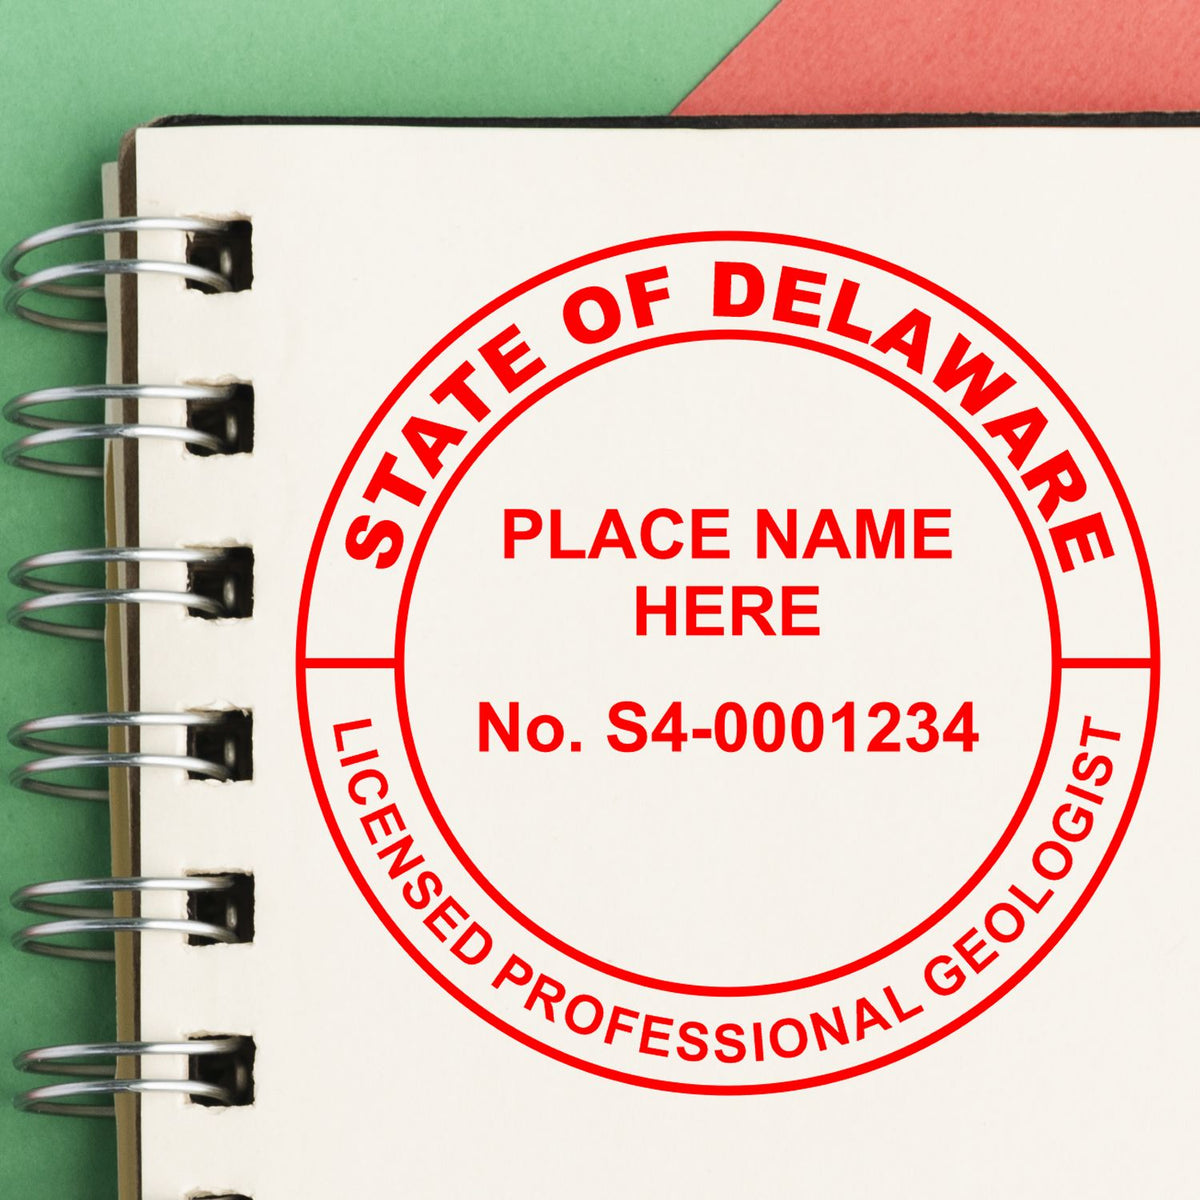 A lifestyle photo showing a stamped image of the Delaware Professional Geologist Seal Stamp on a piece of paper